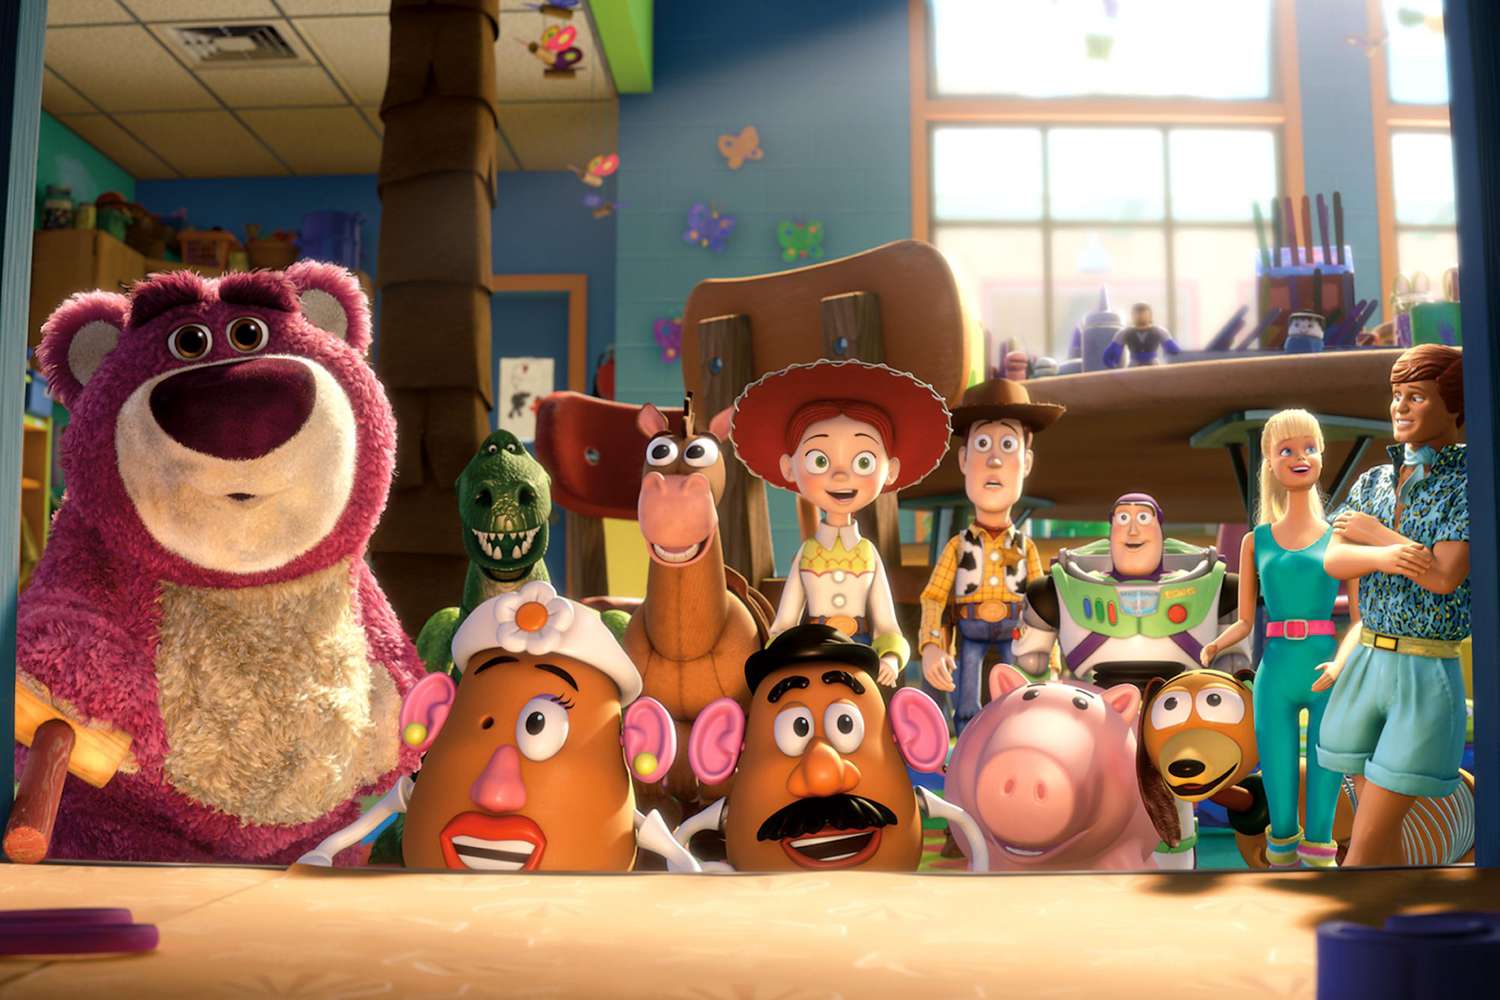 4. Toy Story 3 (2010)